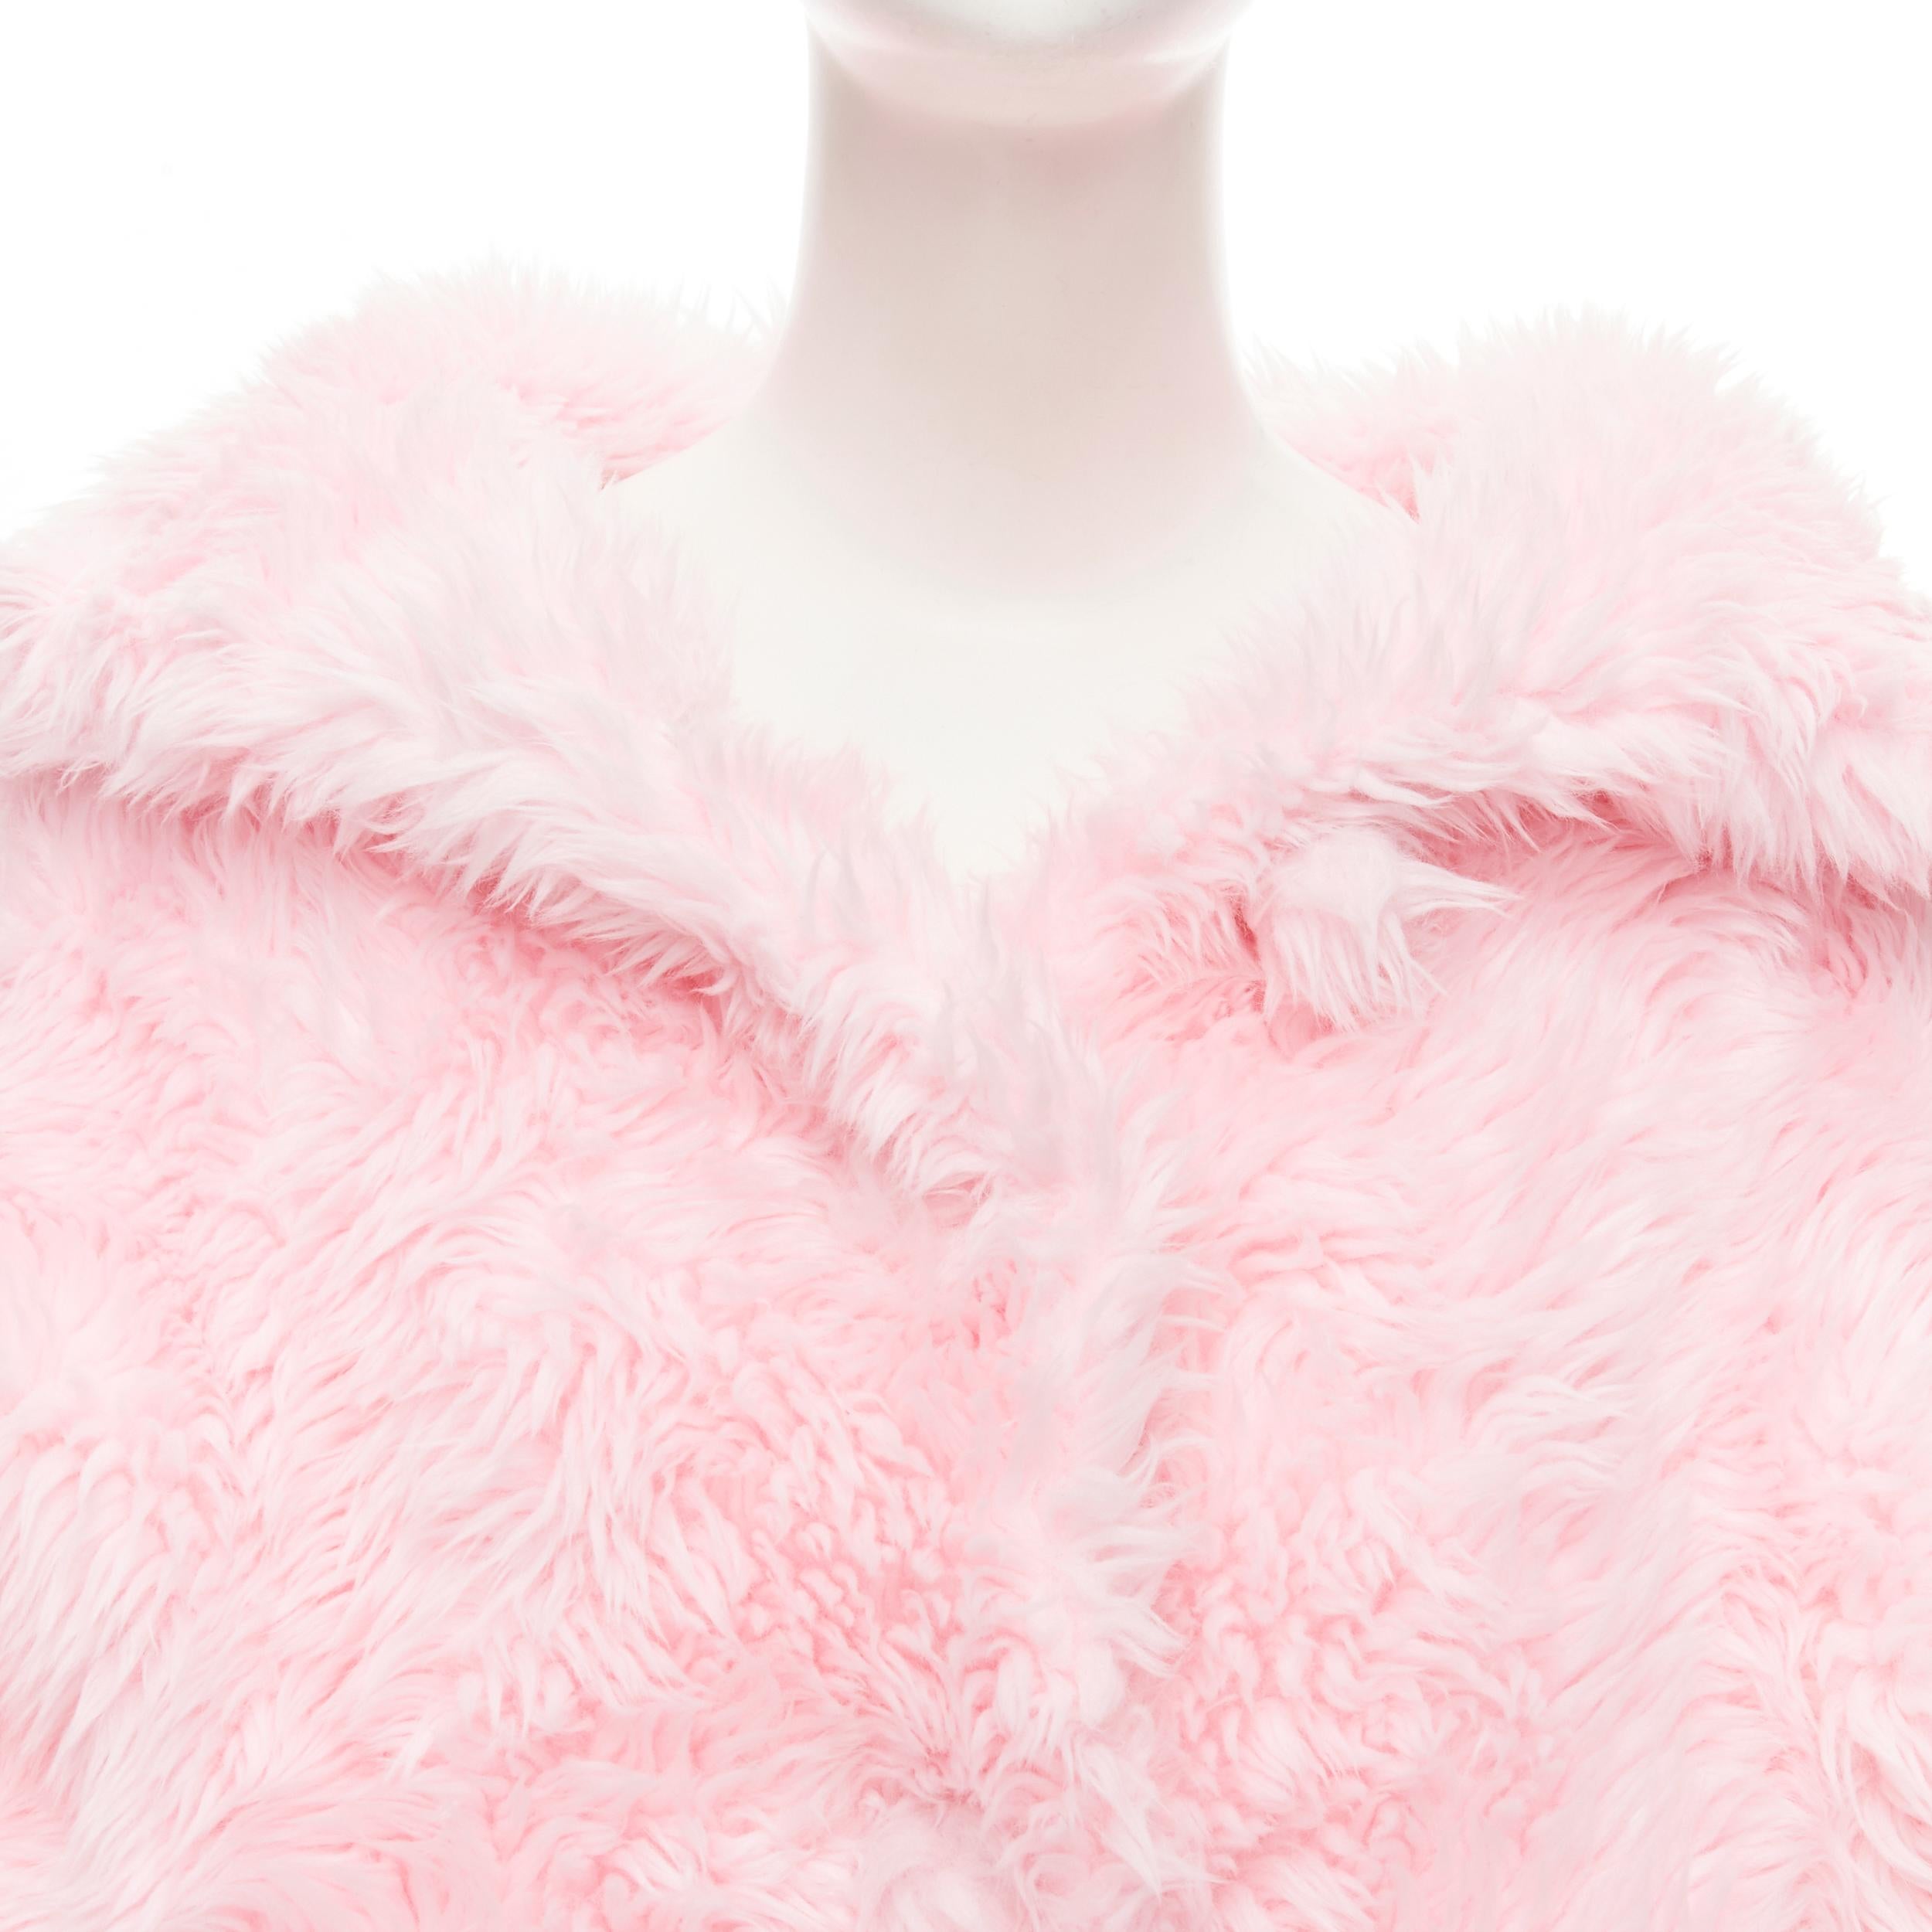 runway BALENCIAGA Demna 2019 pink faux fur plush Swing coat FR36 S 
Reference: TGAS/C00405 
Brand: Balenciaga 
Designer: Demna 
Collection: 2019 Runway 
Material: Modal 
Color: Pink 
Pattern: Solid 
Closure: Button 
Extra Detail: Faux shaggy fur.